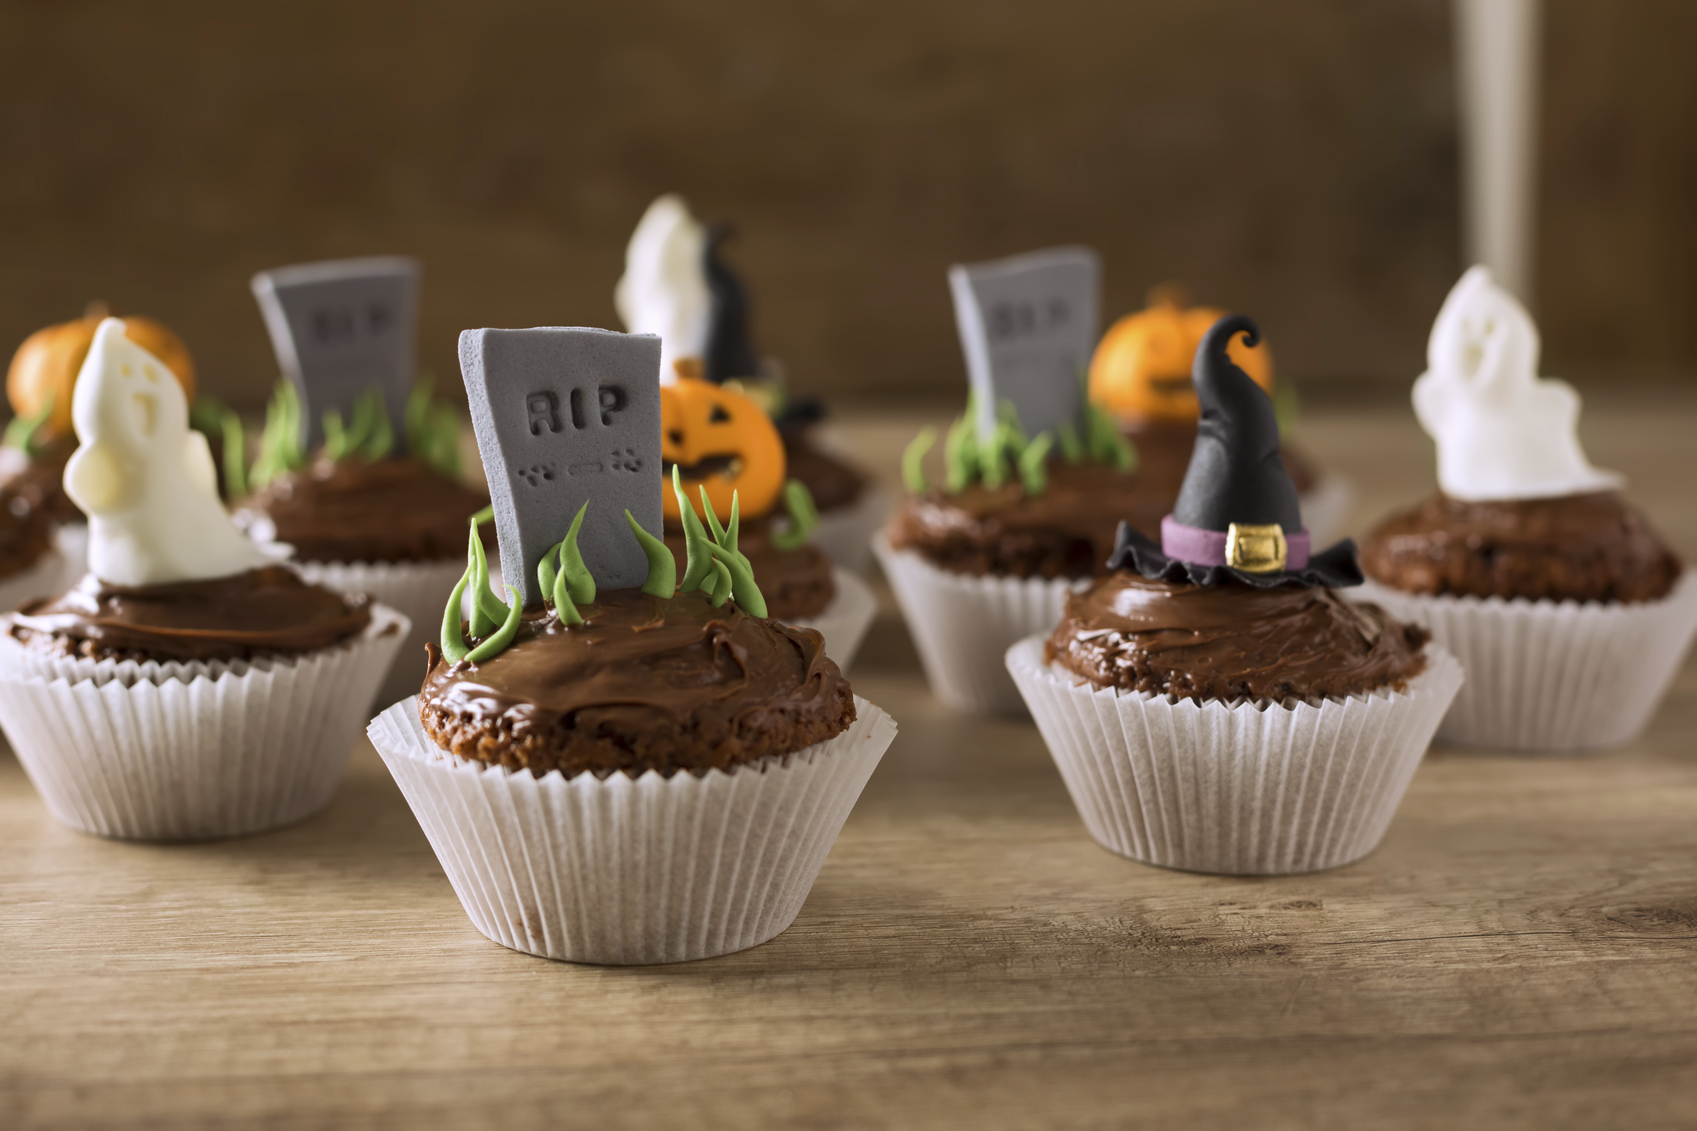 Group of helloween cupcakes on wood table